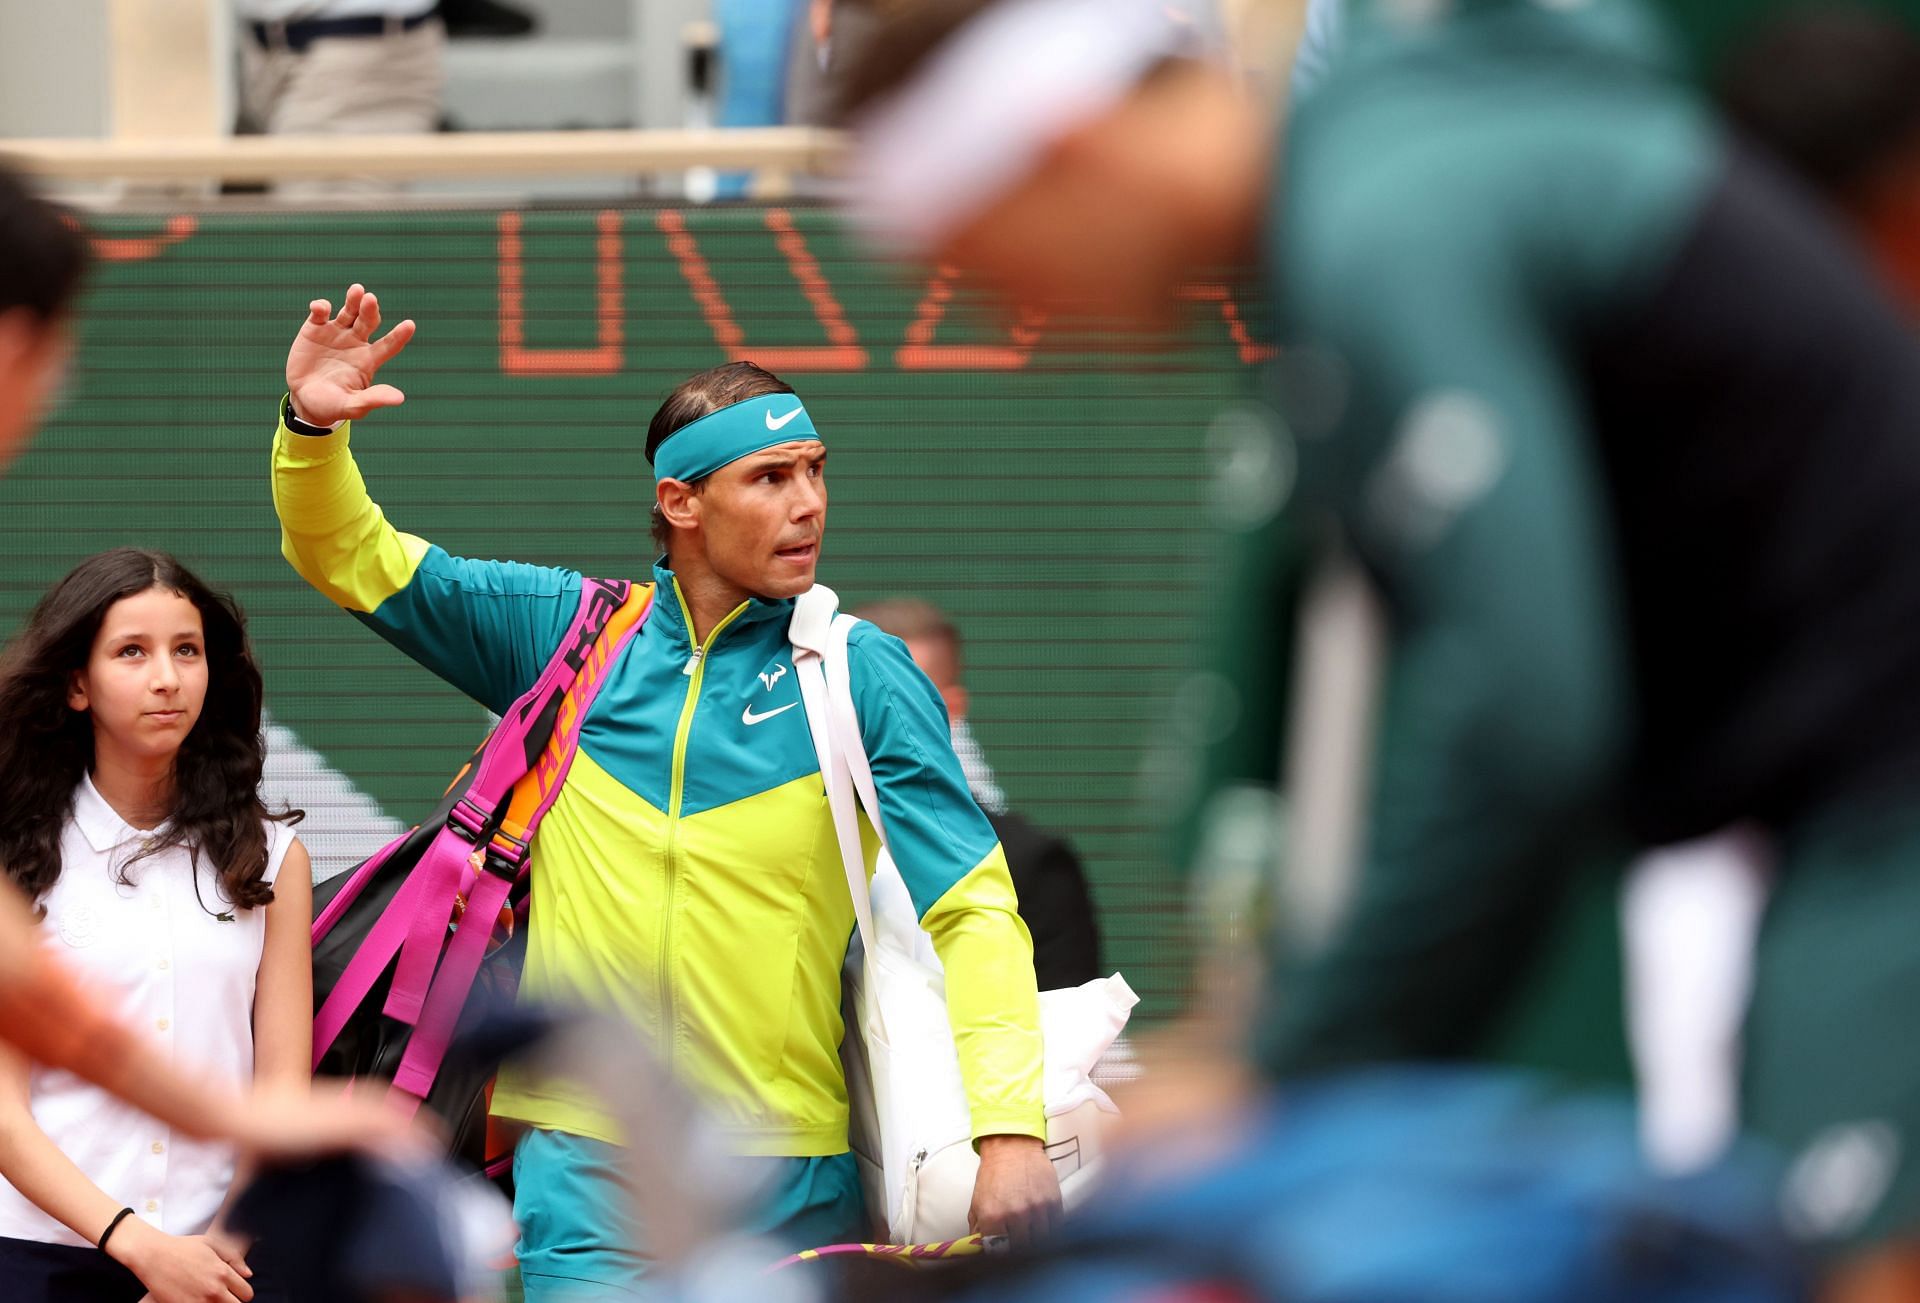 Rafael Nadal has said he intends to compete in Wimbledon